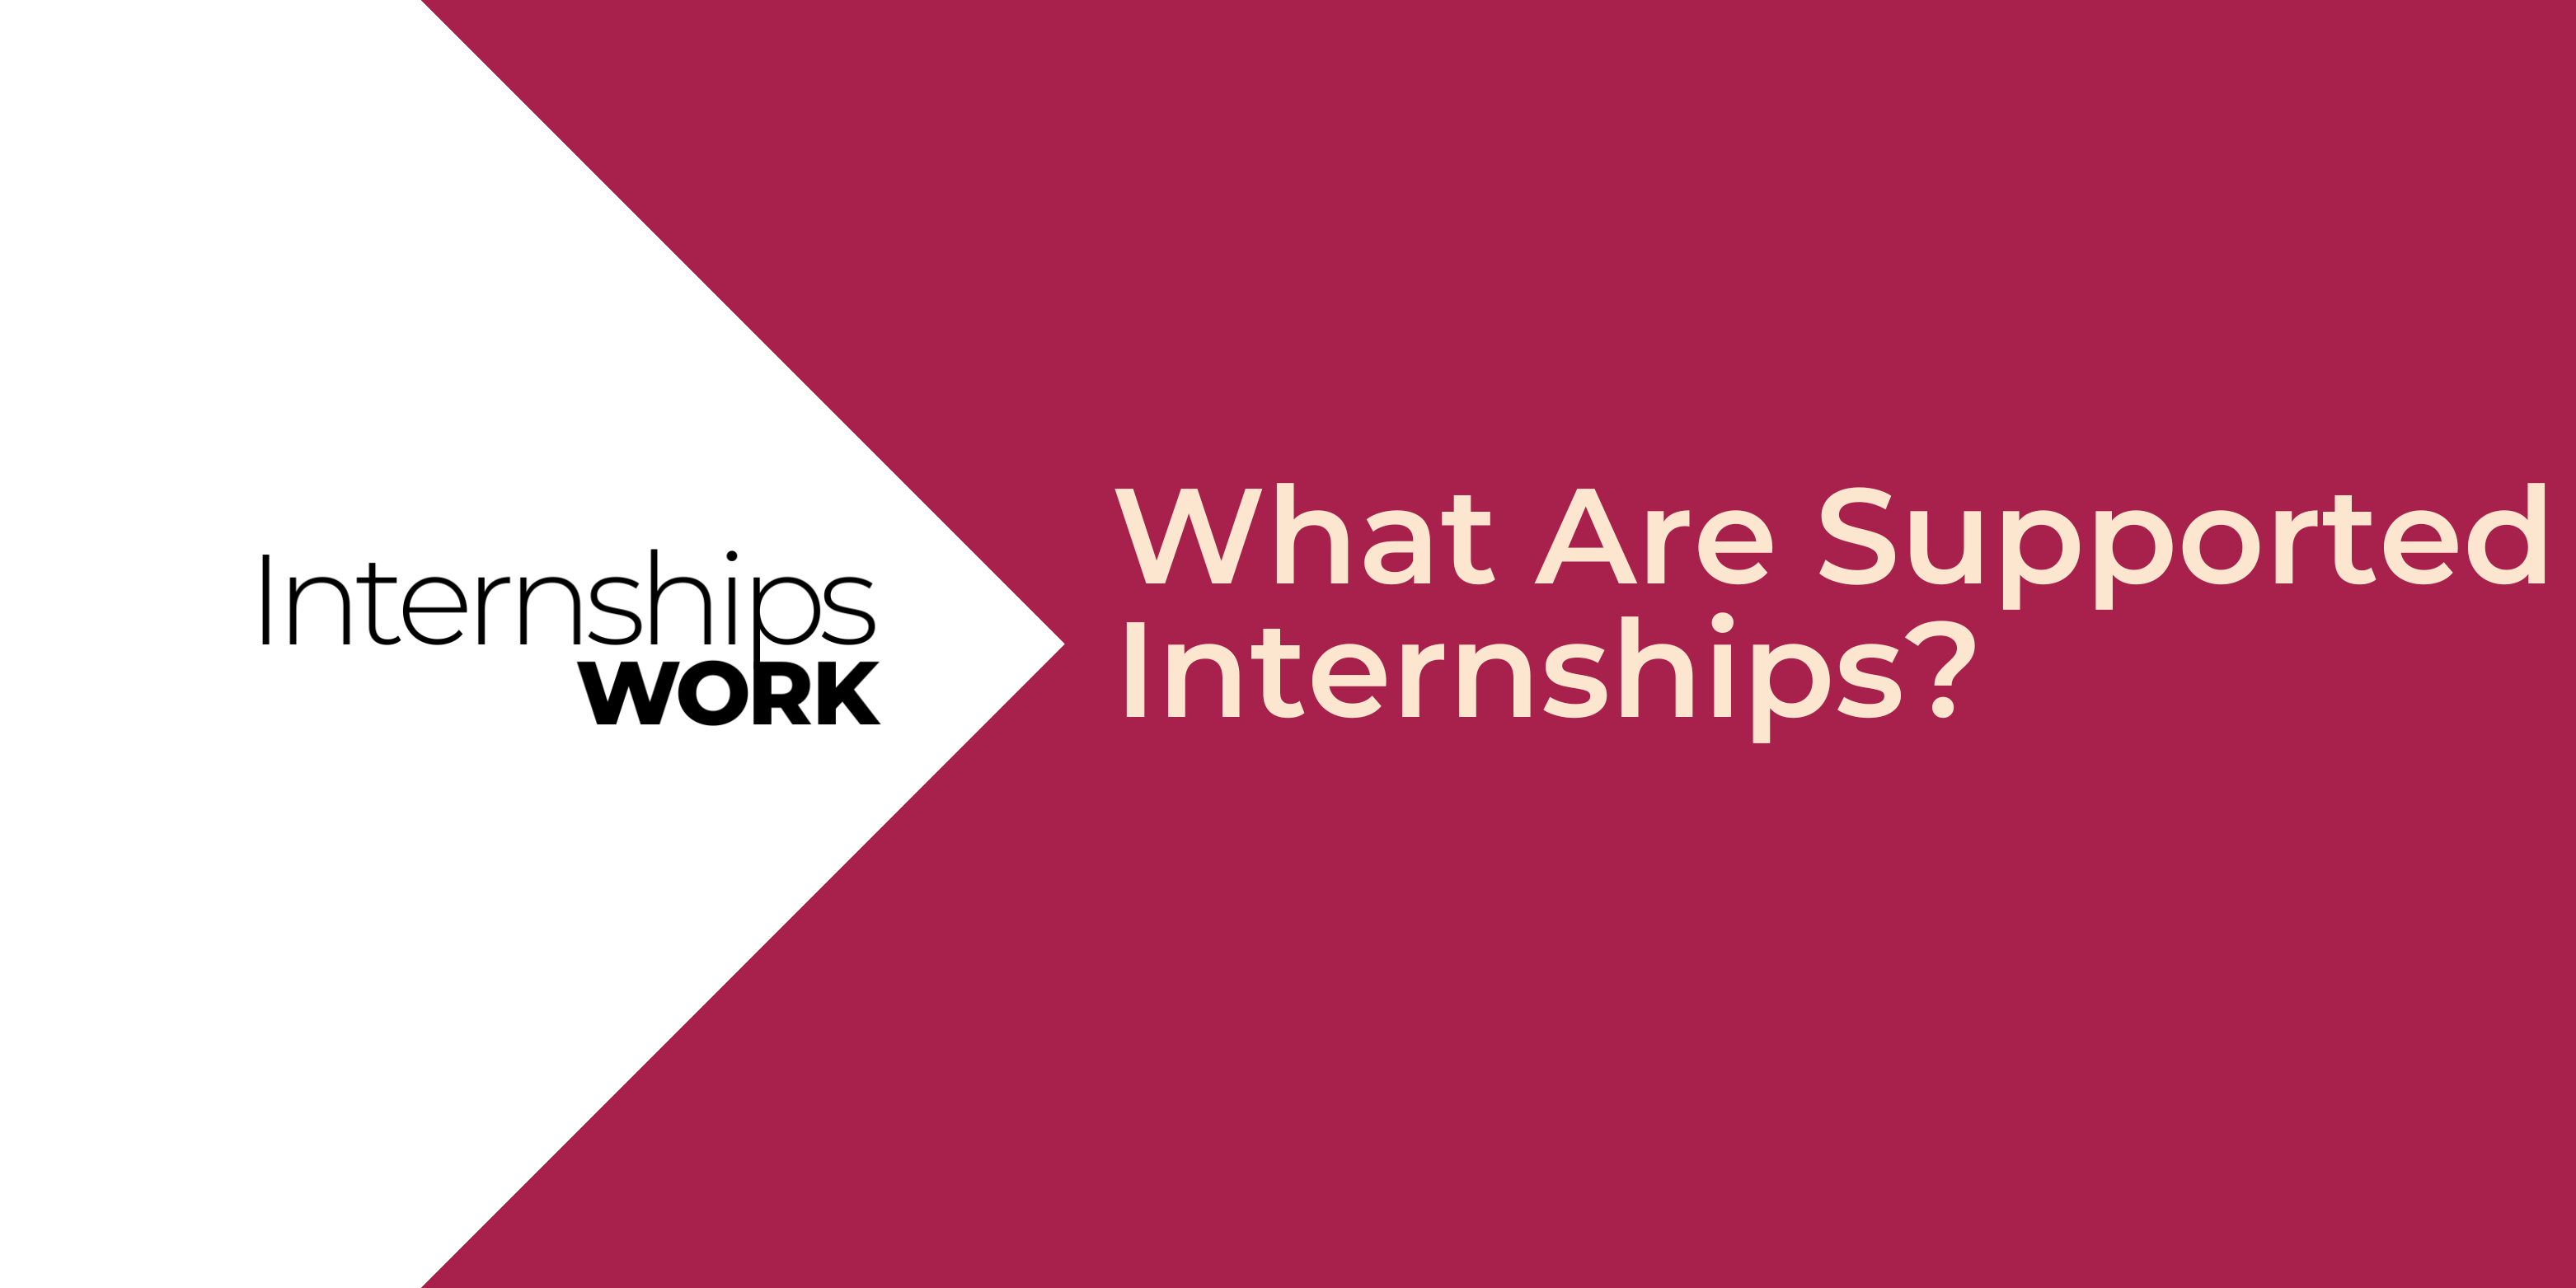 What Are Supported Internships